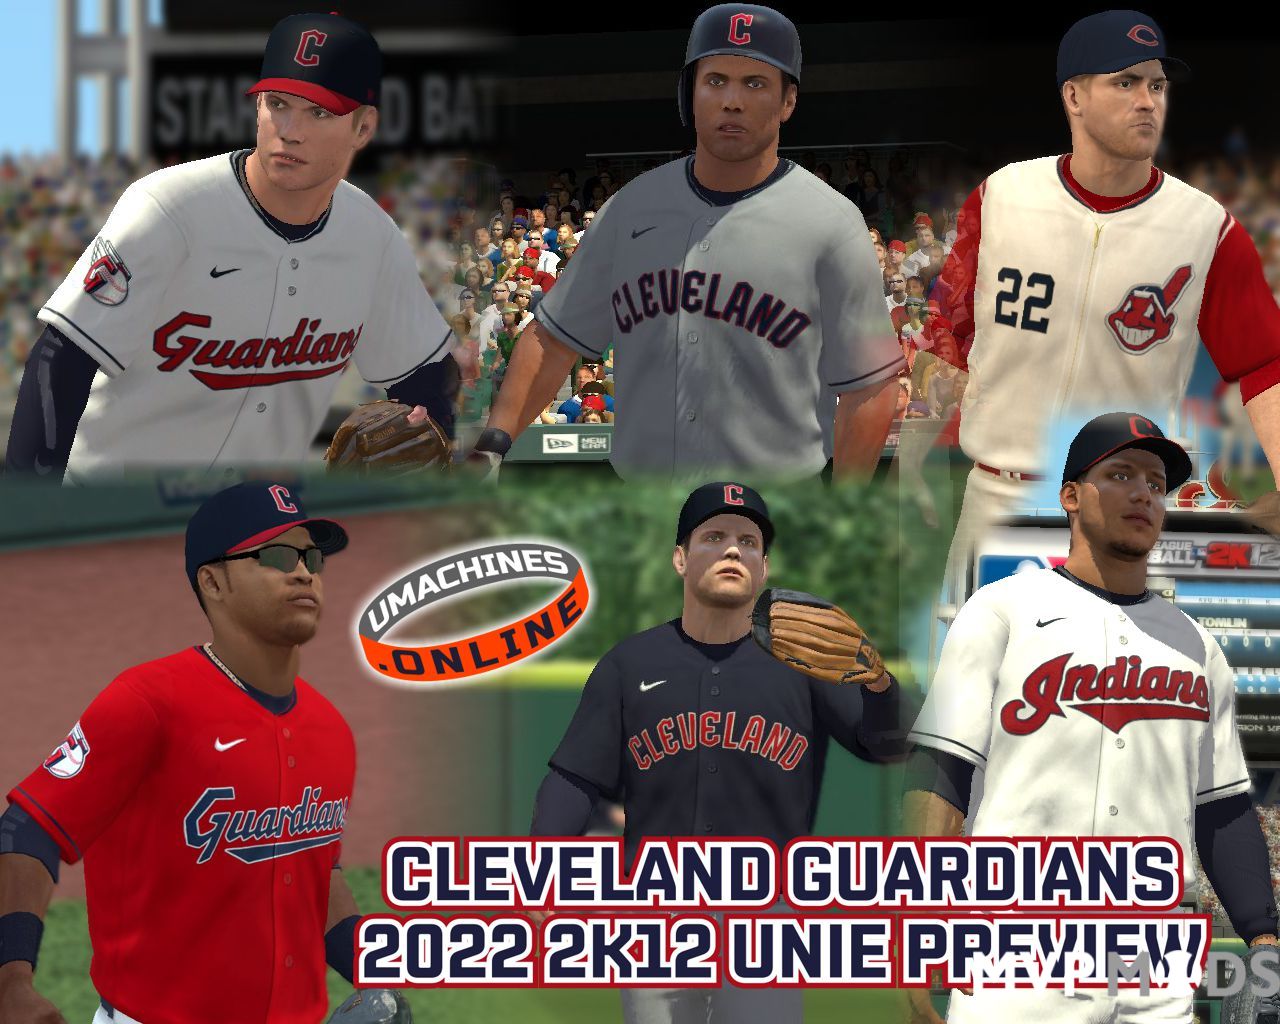 See what the Cleveland Guardians' uniforms will look like